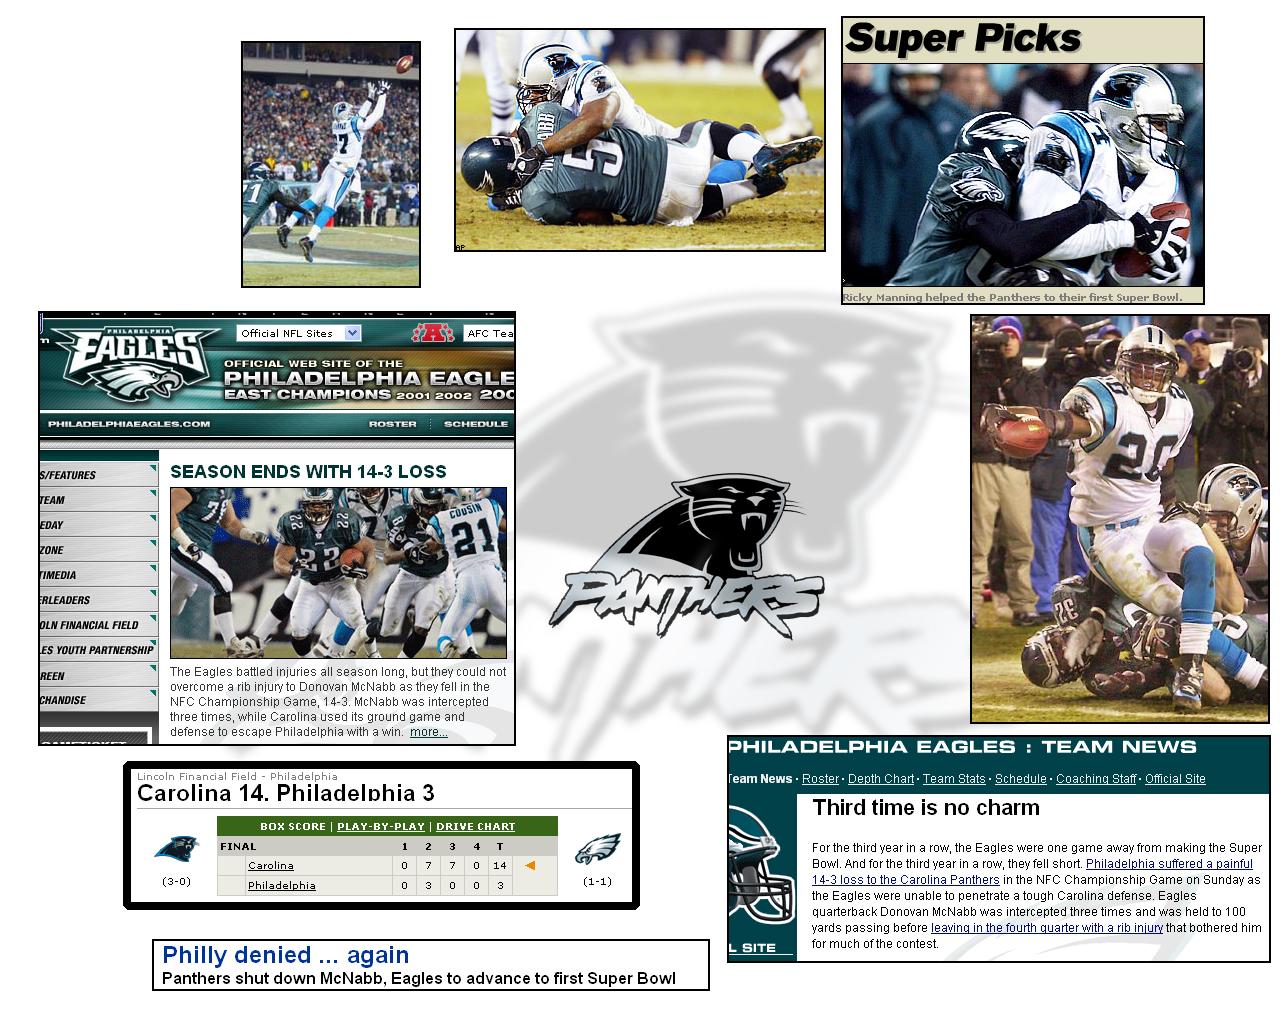 After the NFC Championship I created this wallpaper to give my roommate Sung (who is a Philly fan) a hard time. ;)